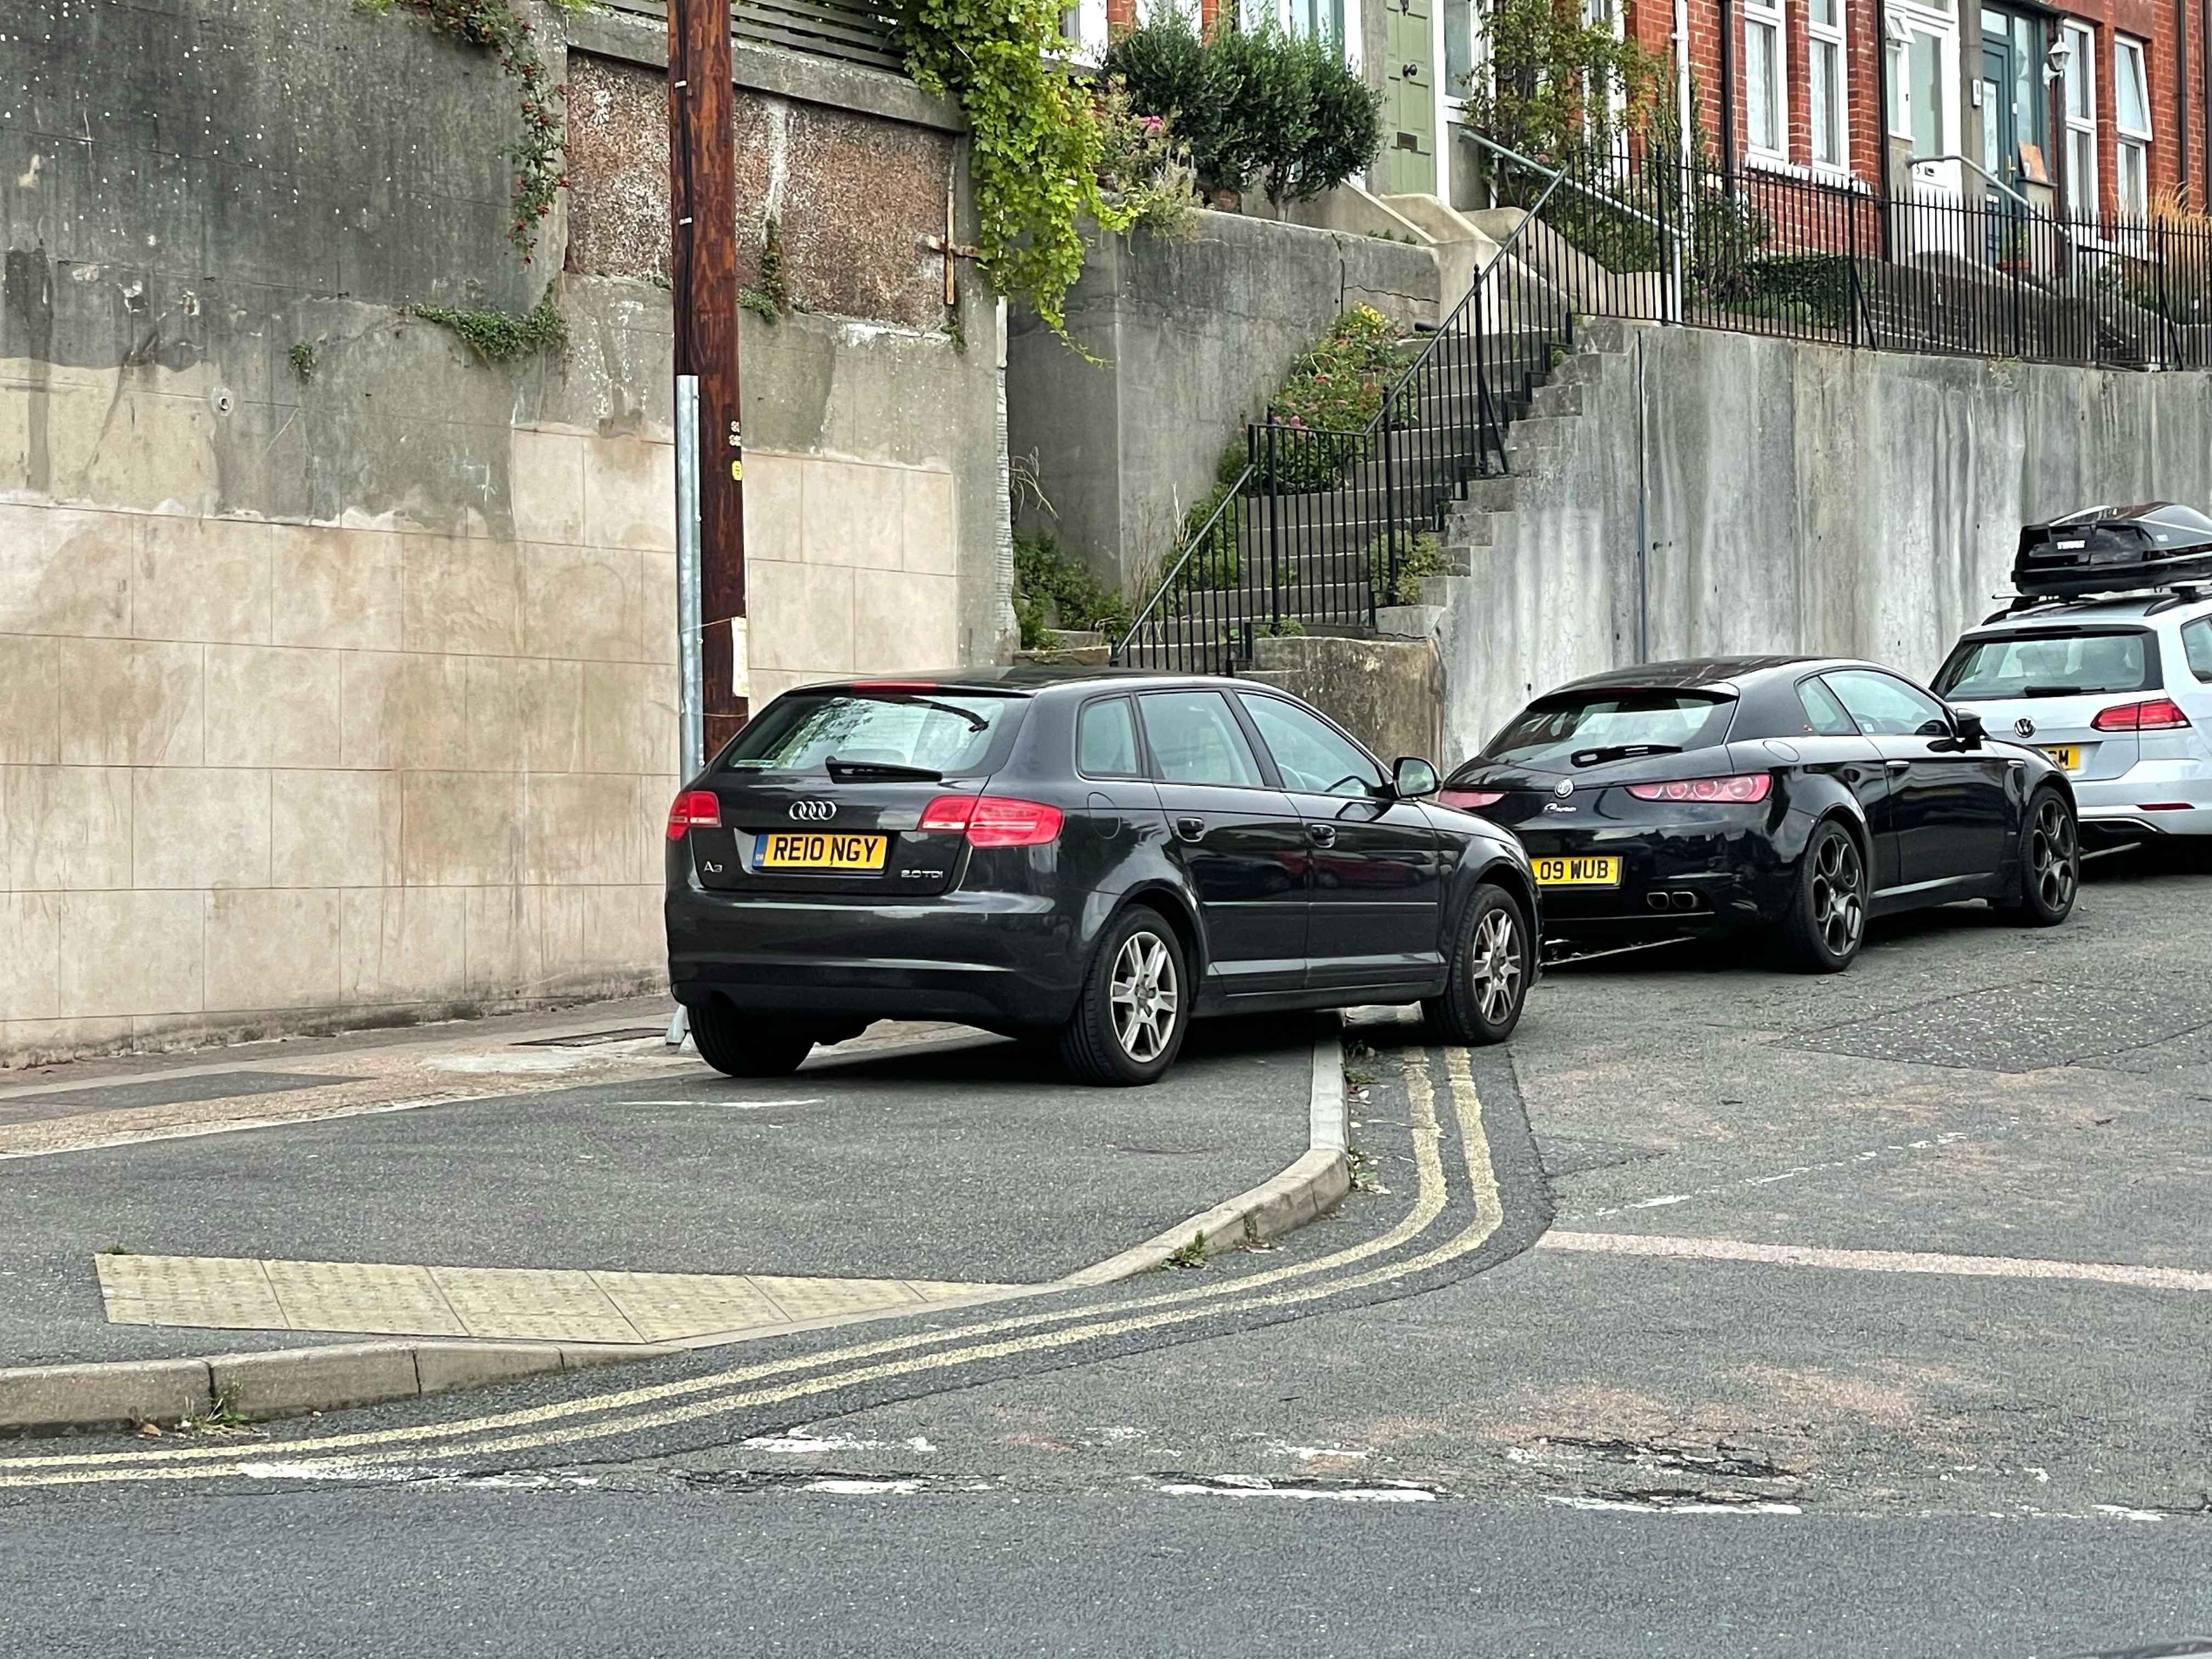 Photograph of RE10 NGY - a Black Audi A3 parked in Hollingdean by a non-resident who uses the local area as part of their Brighton commute. The first of three photographs supplied by the residents of Hollingdean.